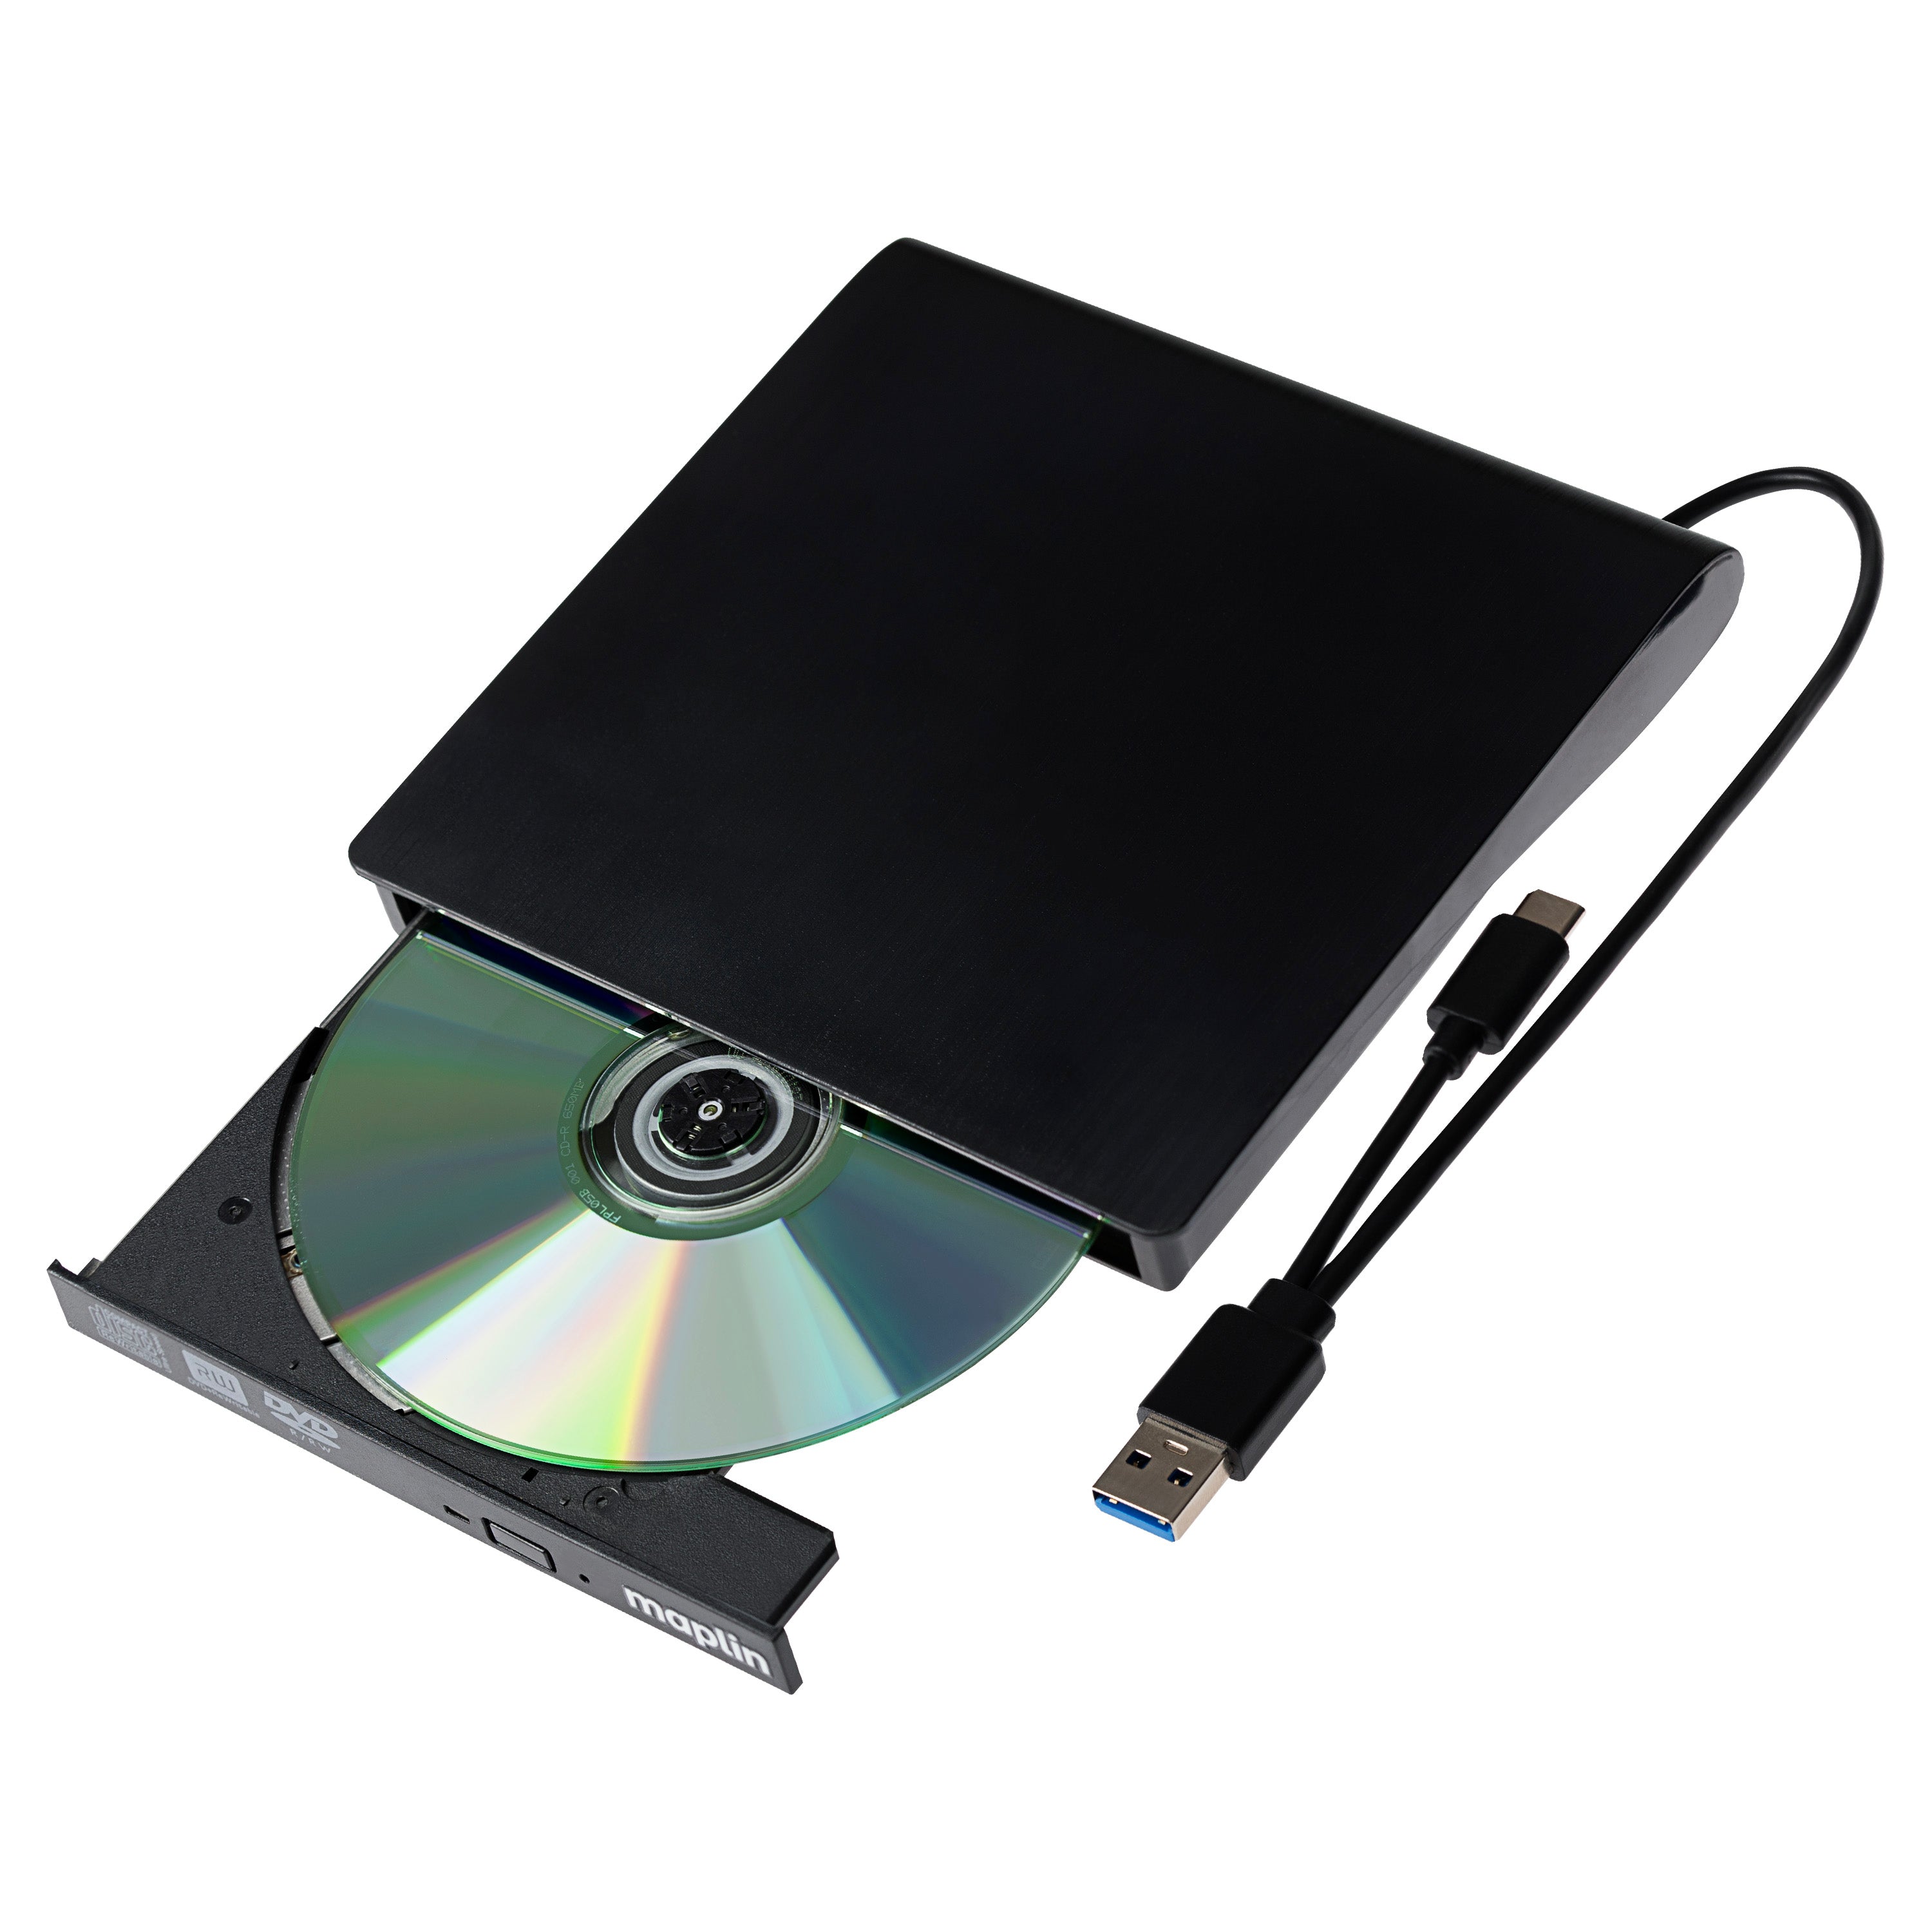 Maplin External CD DVD Optical Drive Reader & Writer Burner with Built-In USB-C / USB-A 3.0 Cables